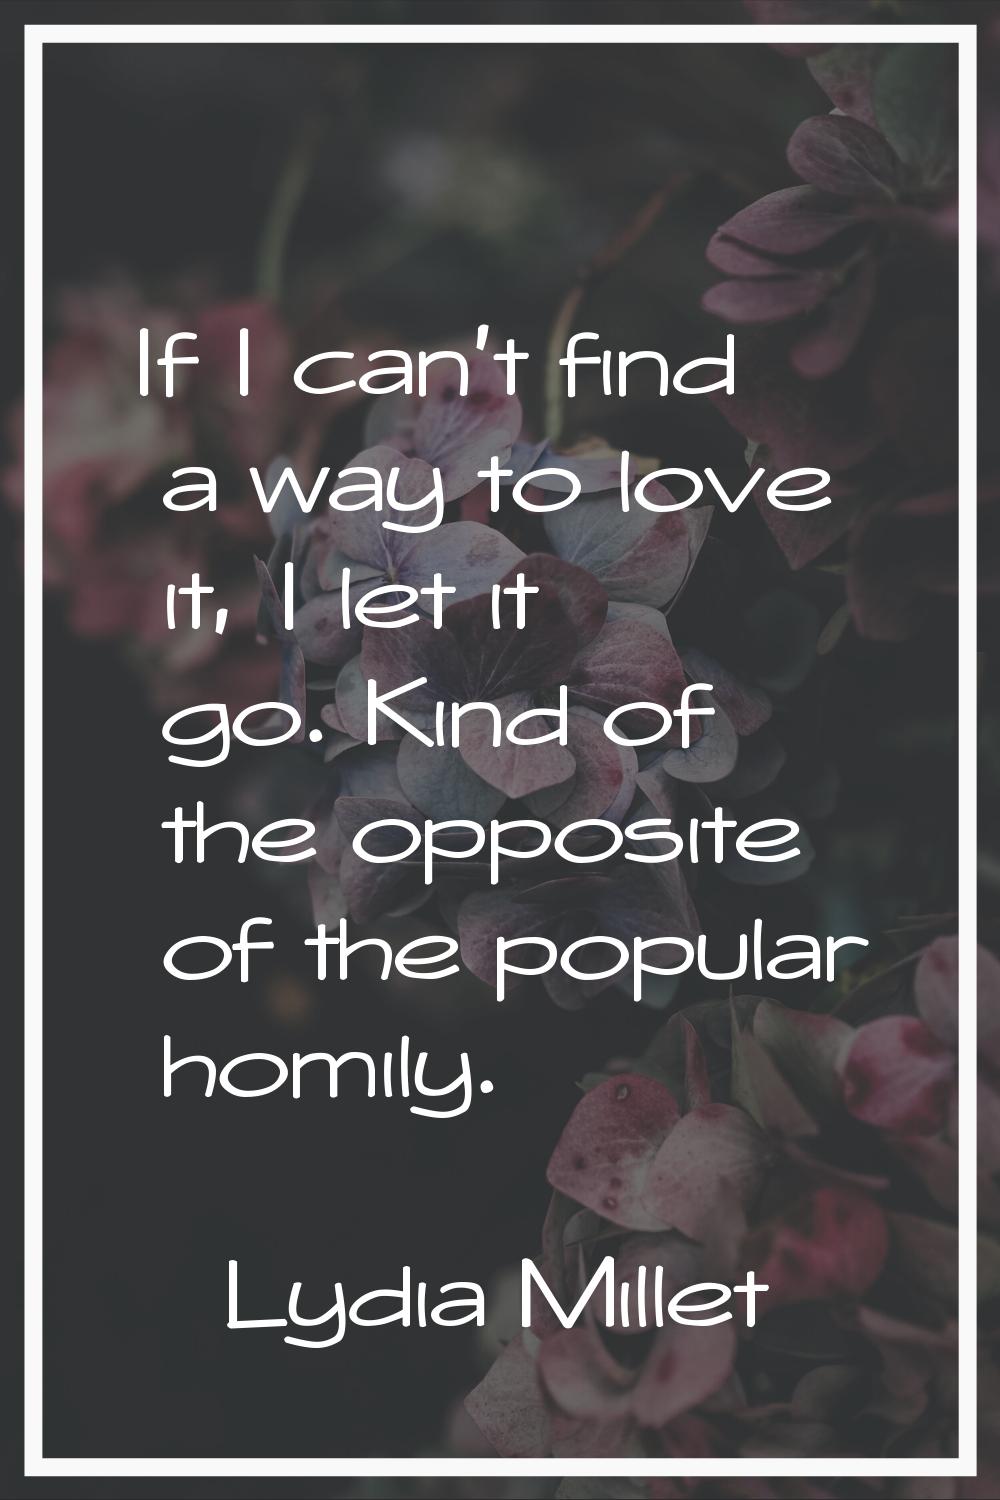 If I can't find a way to love it, I let it go. Kind of the opposite of the popular homily.